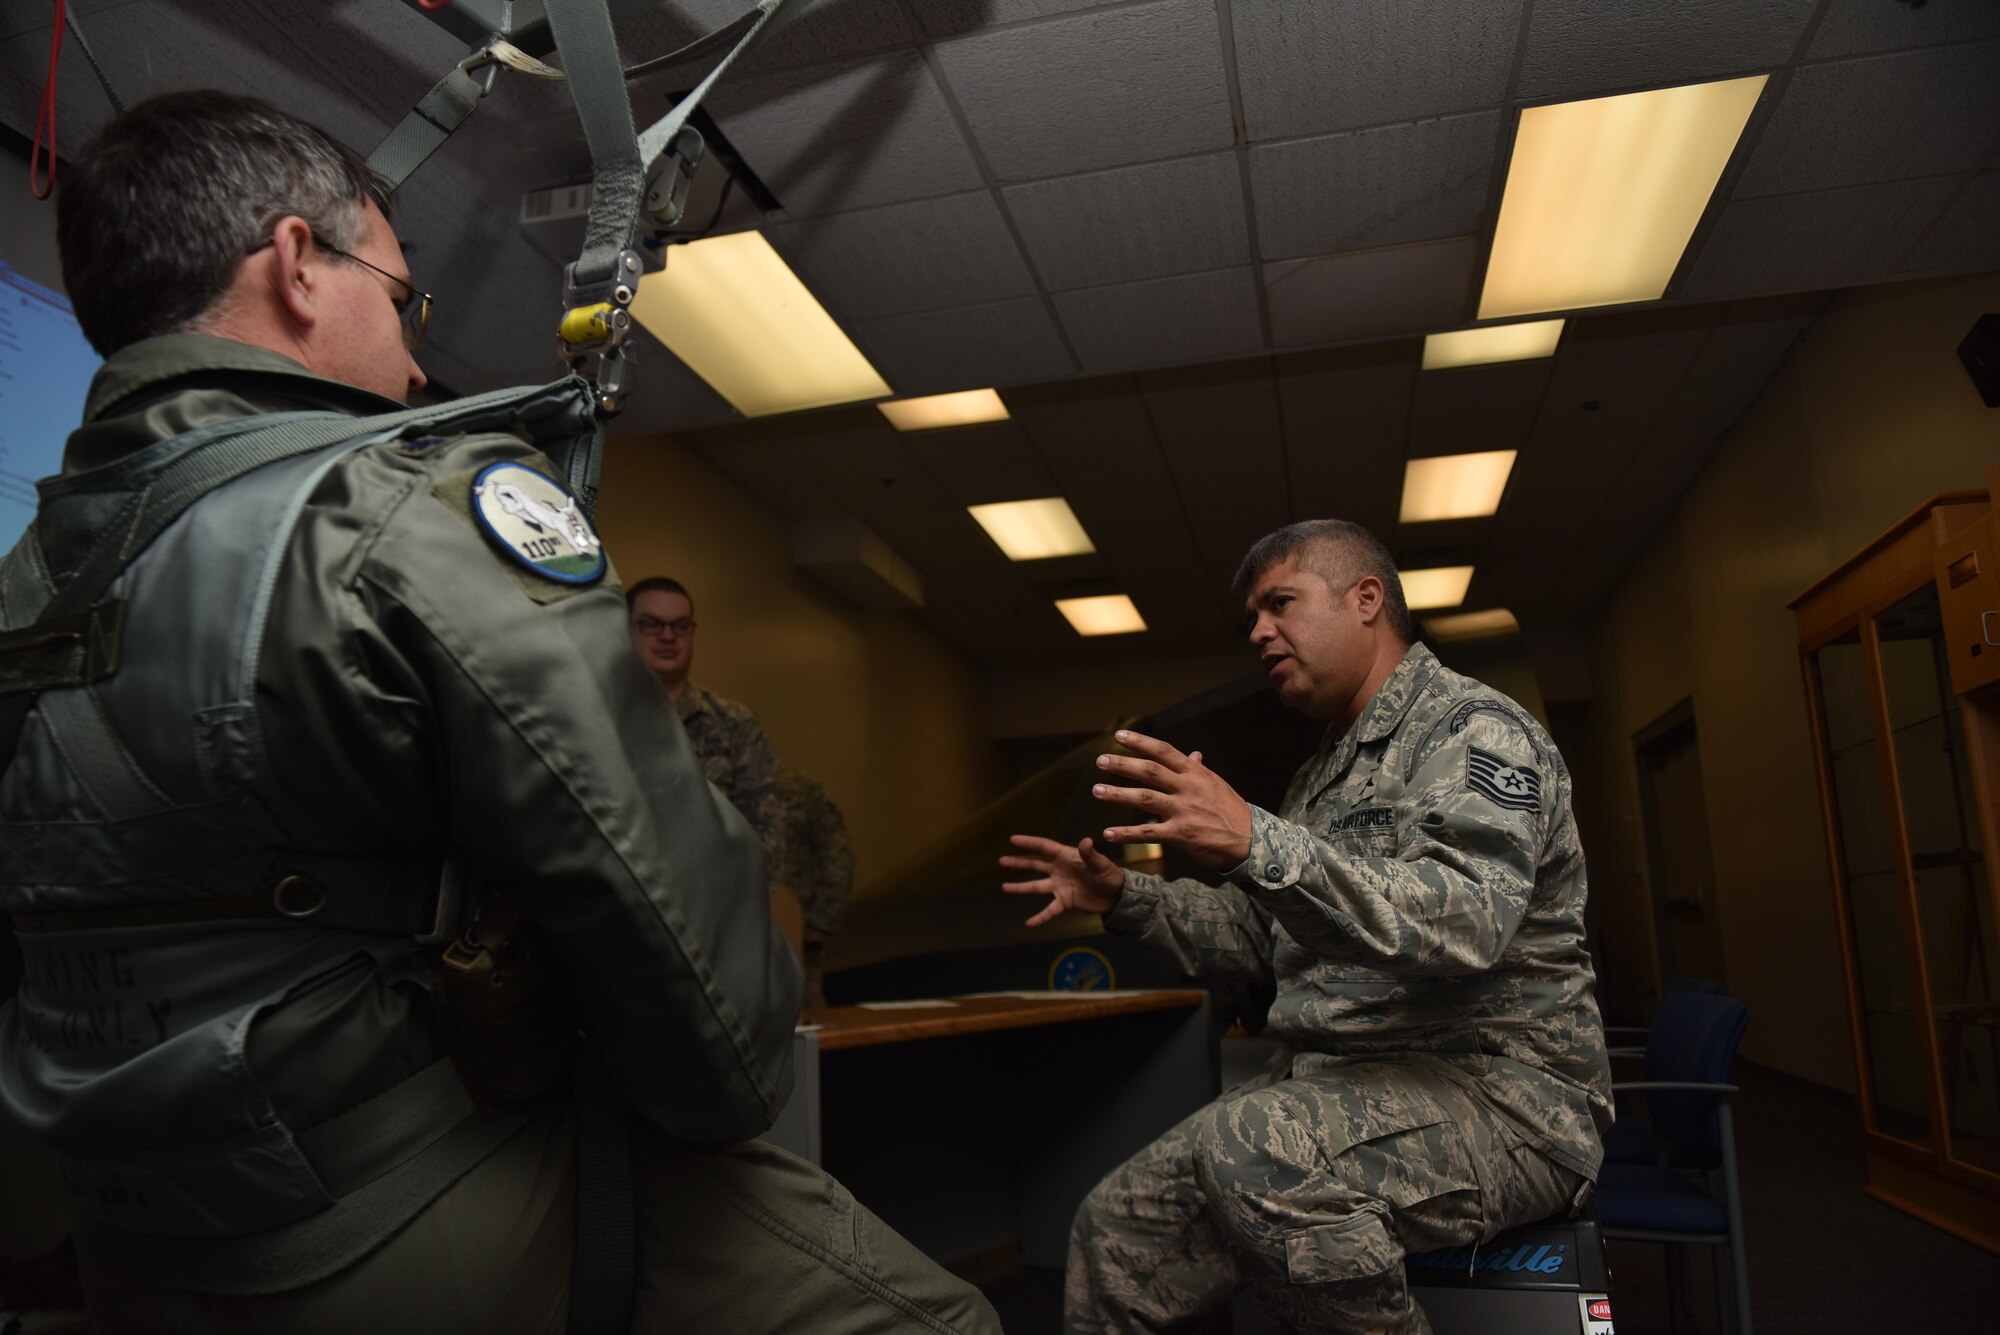 US Air Force Tech. Sgt. Sergio Avalos, a survival, evasion, resist and escape (SERE) specialist, instructs a course participant on how to properly correct in-air parachute malfunctions. Parachutes malfunctions can cause the various complications while freefalling, it is imperative that flyers know the proper way to correct these malfunctions in a timely manner to reduce risk of life.